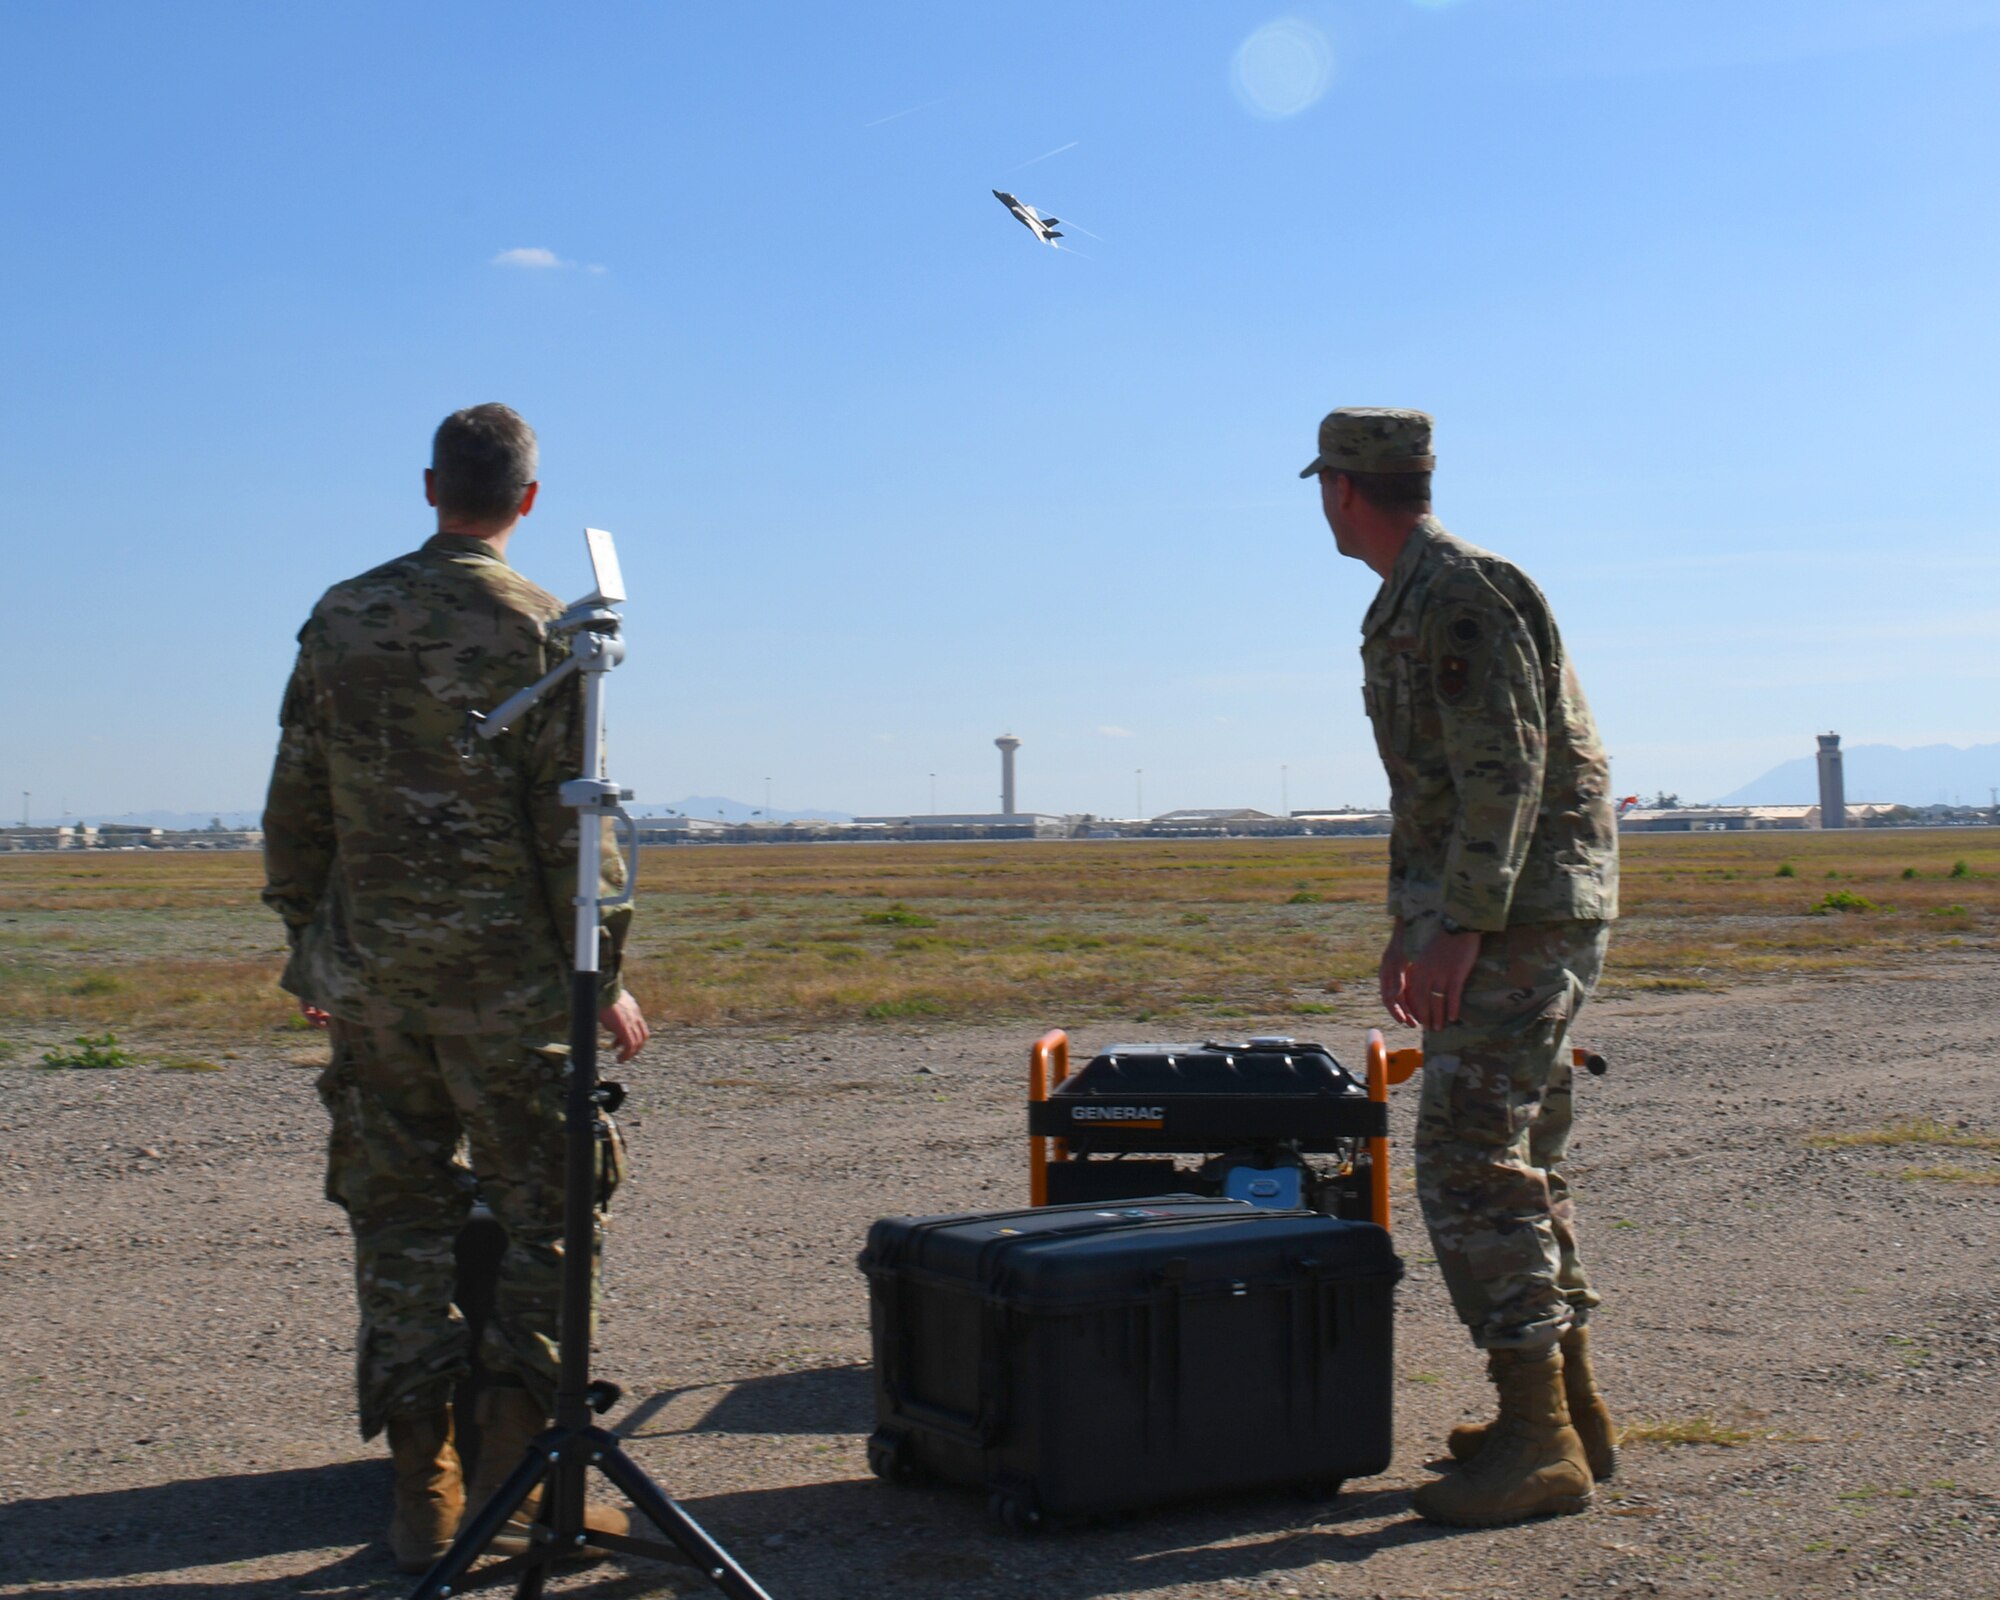 First Lt. Adam Treece, 56th Operations Support Squadron intelligence readiness chief, and Capt. David Coyle, 56th OSS weapons officer, showcase a prototype threat emitter system Jan. 17, 2020, at Luke Air Force Base, Ariz.